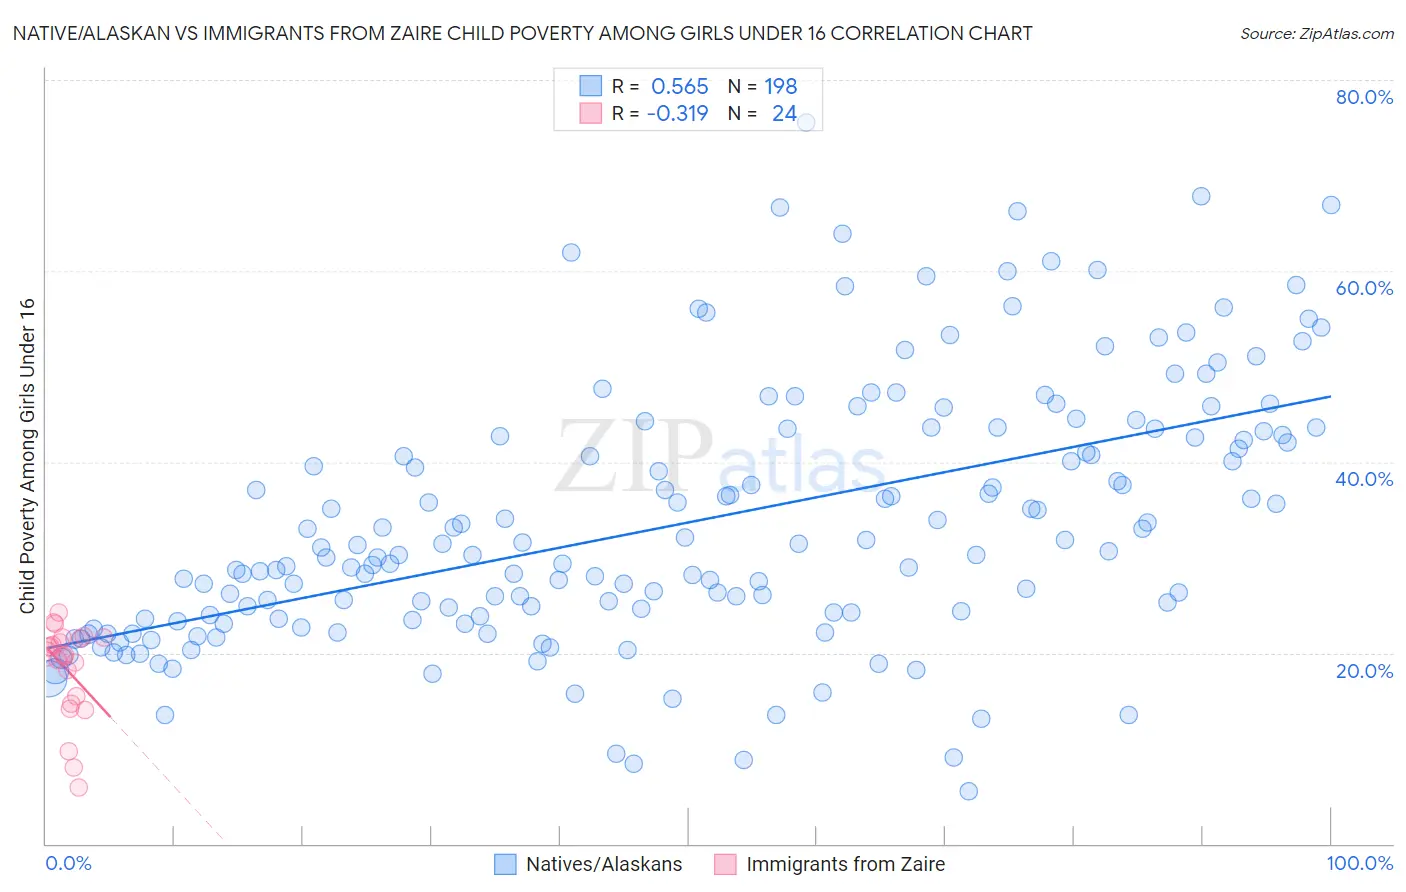 Native/Alaskan vs Immigrants from Zaire Child Poverty Among Girls Under 16